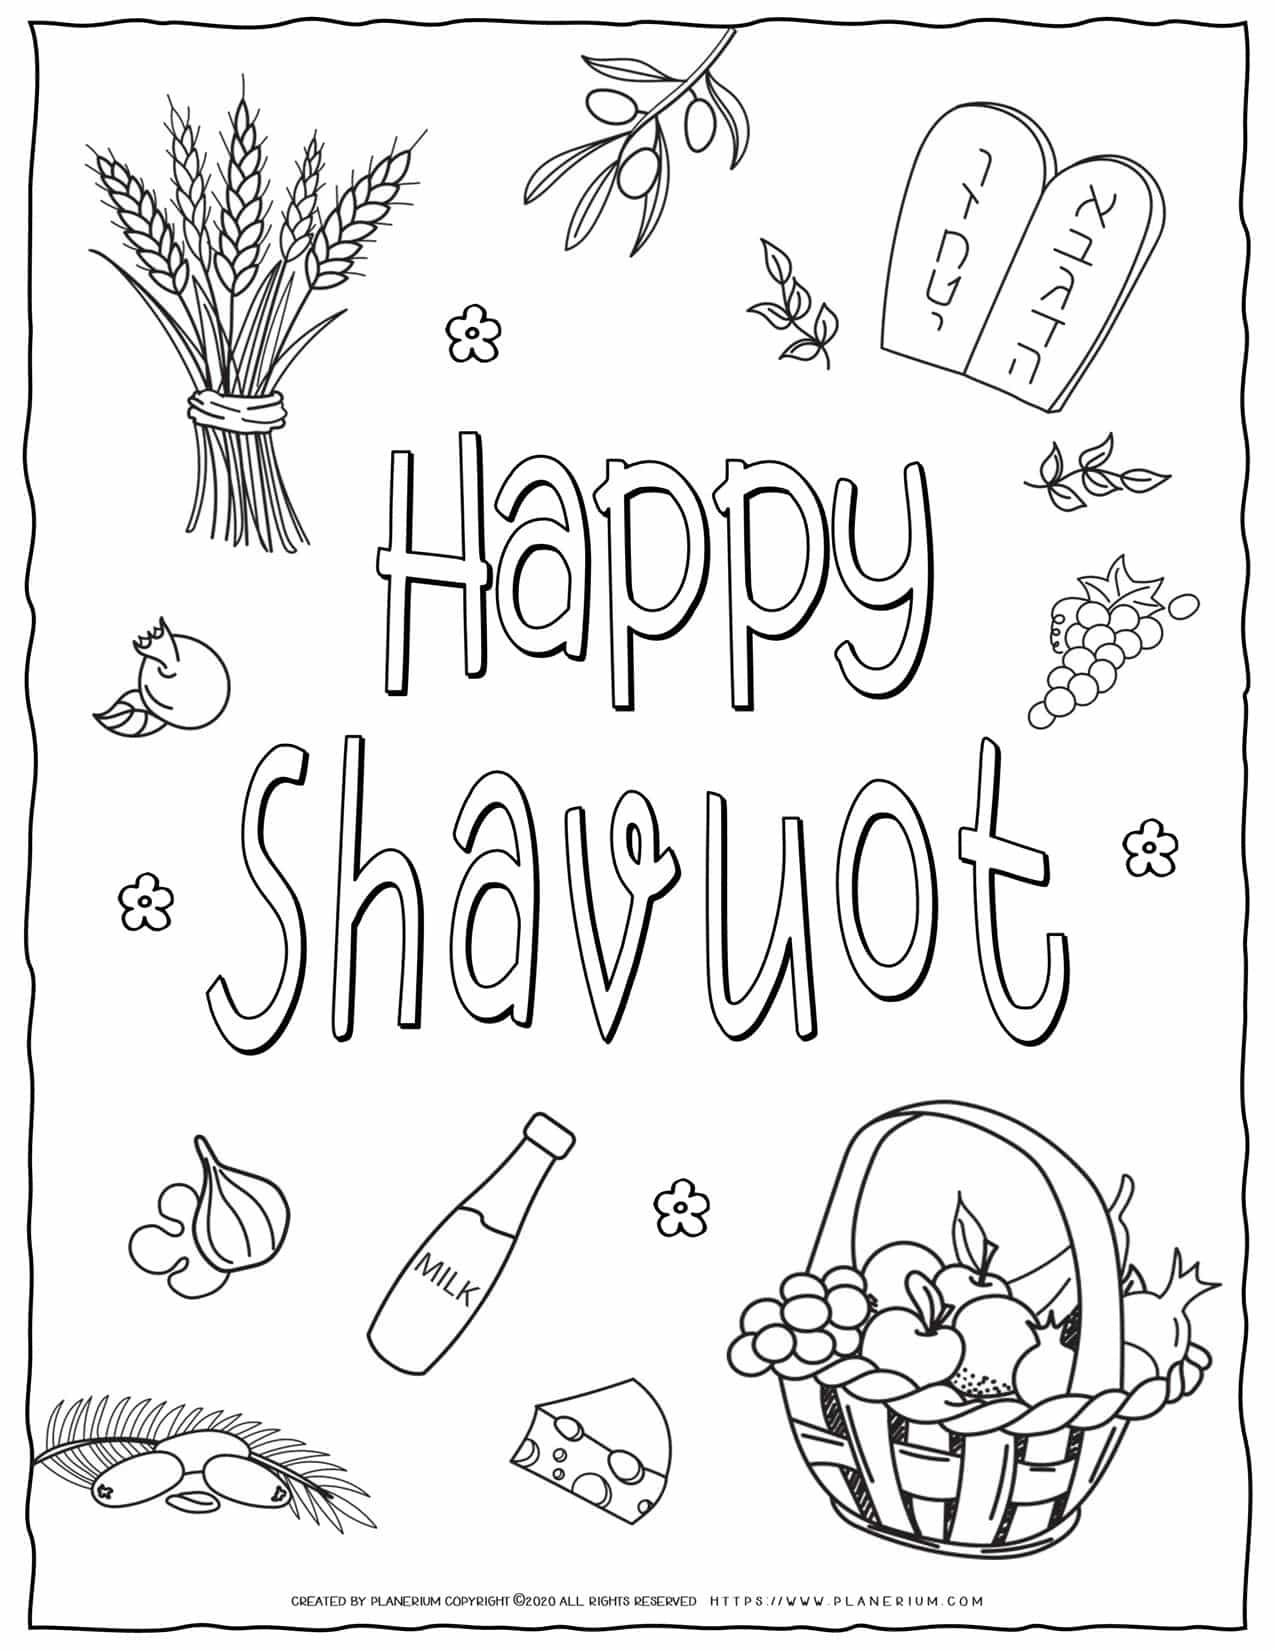 Shavuot Coloring Page - Happy Shavuot in English | Planerium